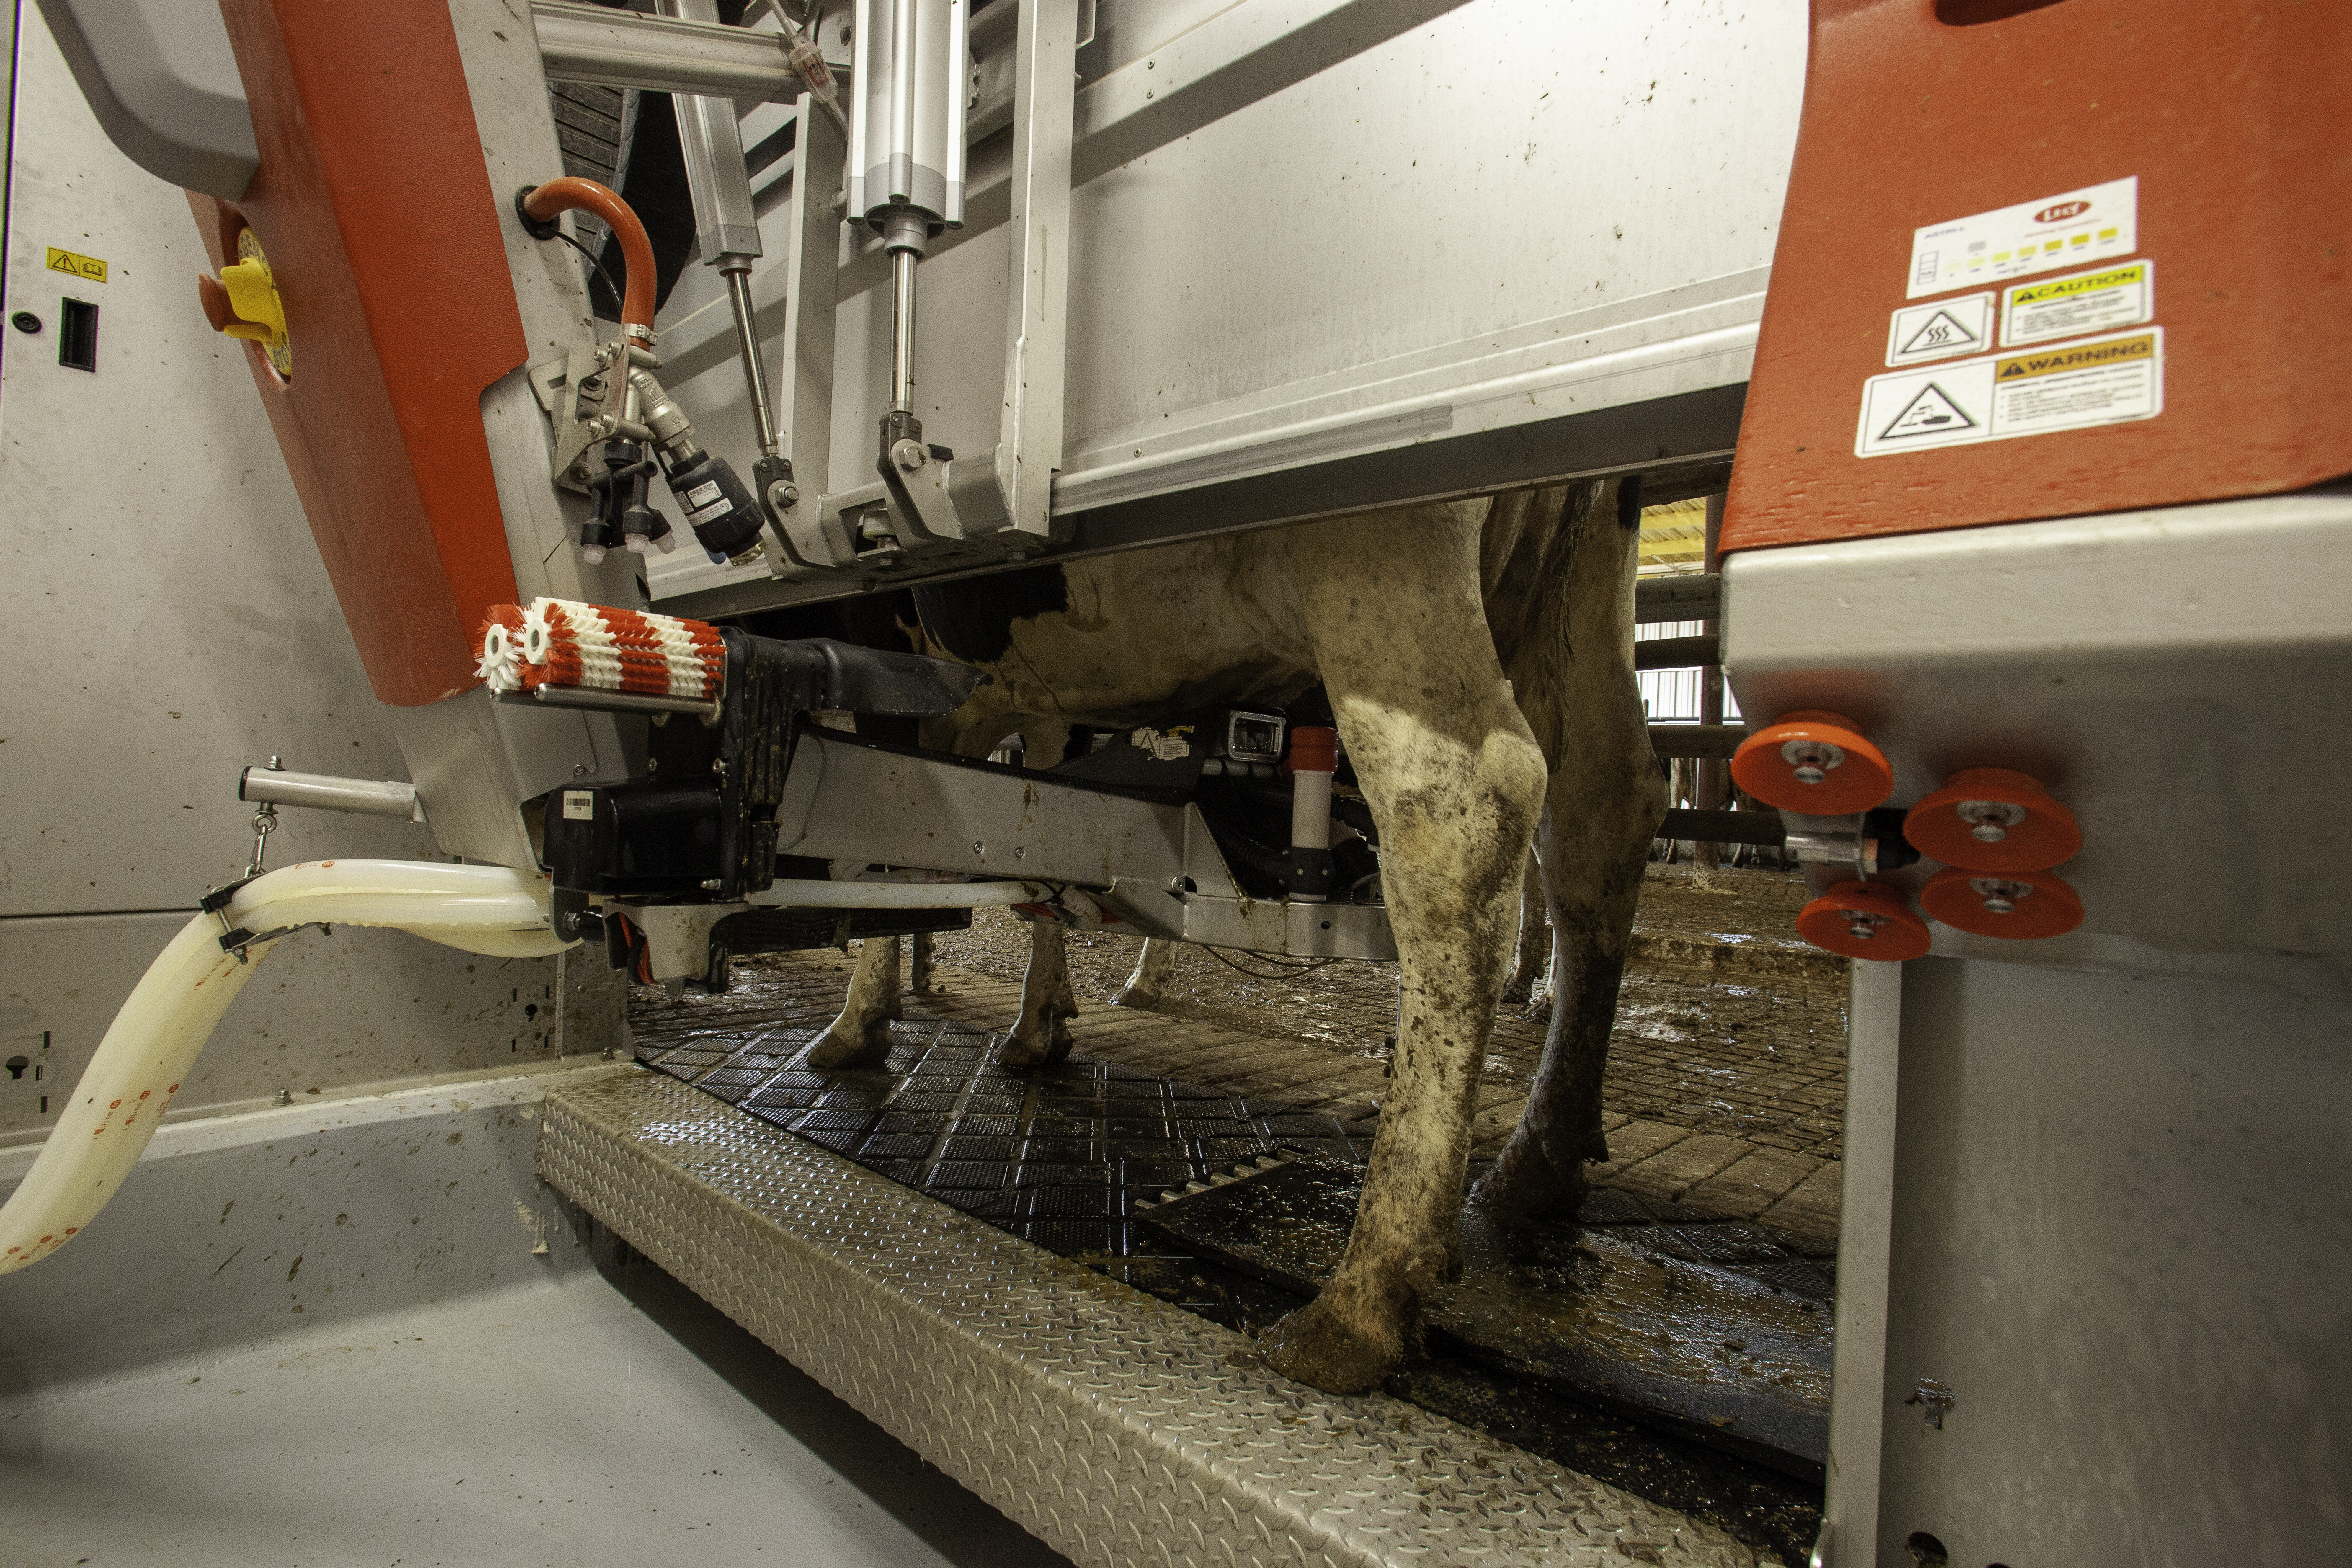 A robotic milker milks one of the cows at T & K Dairy.